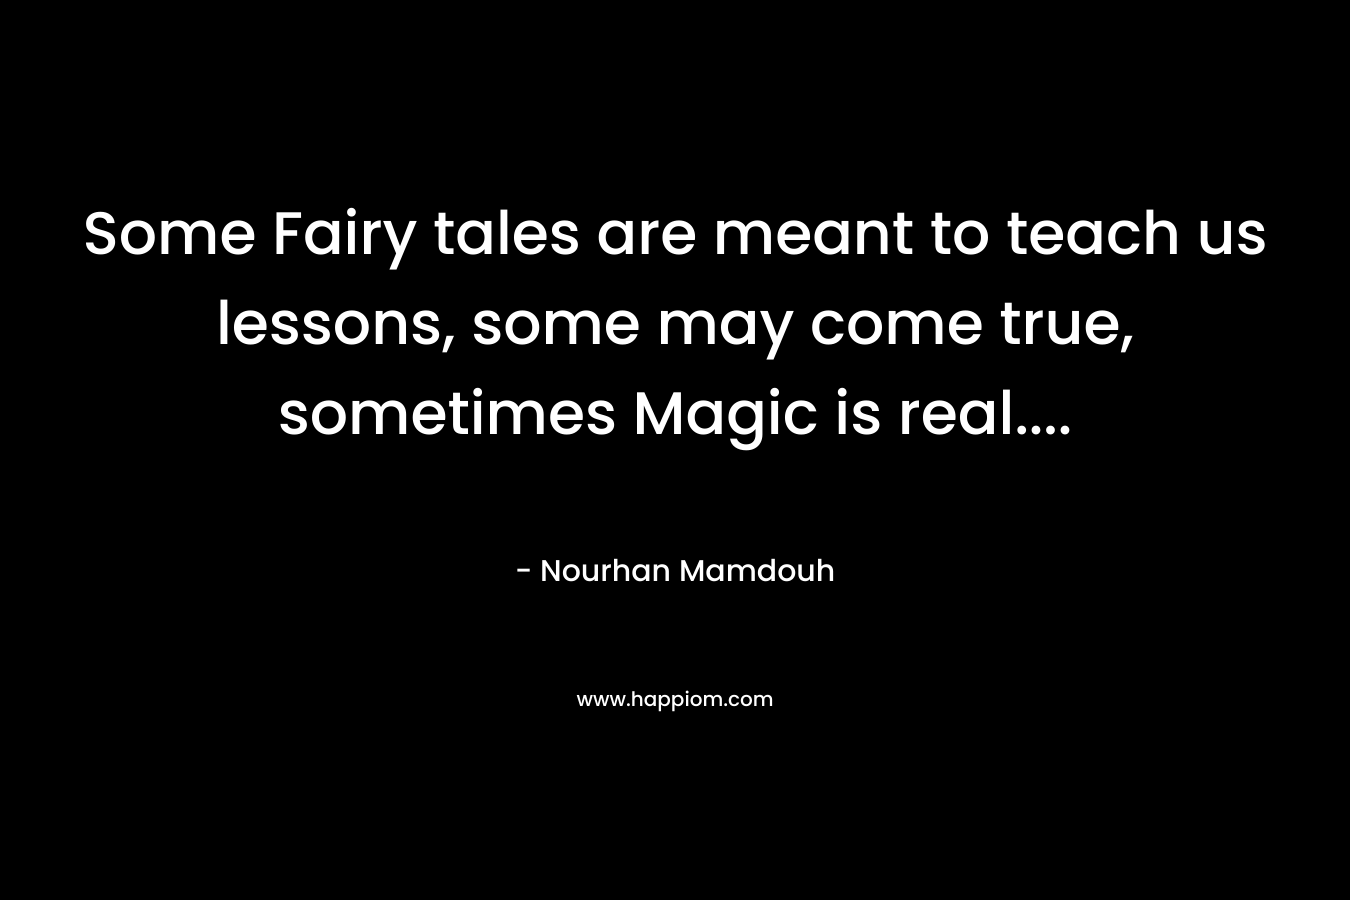 Some Fairy tales are meant to teach us lessons, some may come true, sometimes Magic is real....